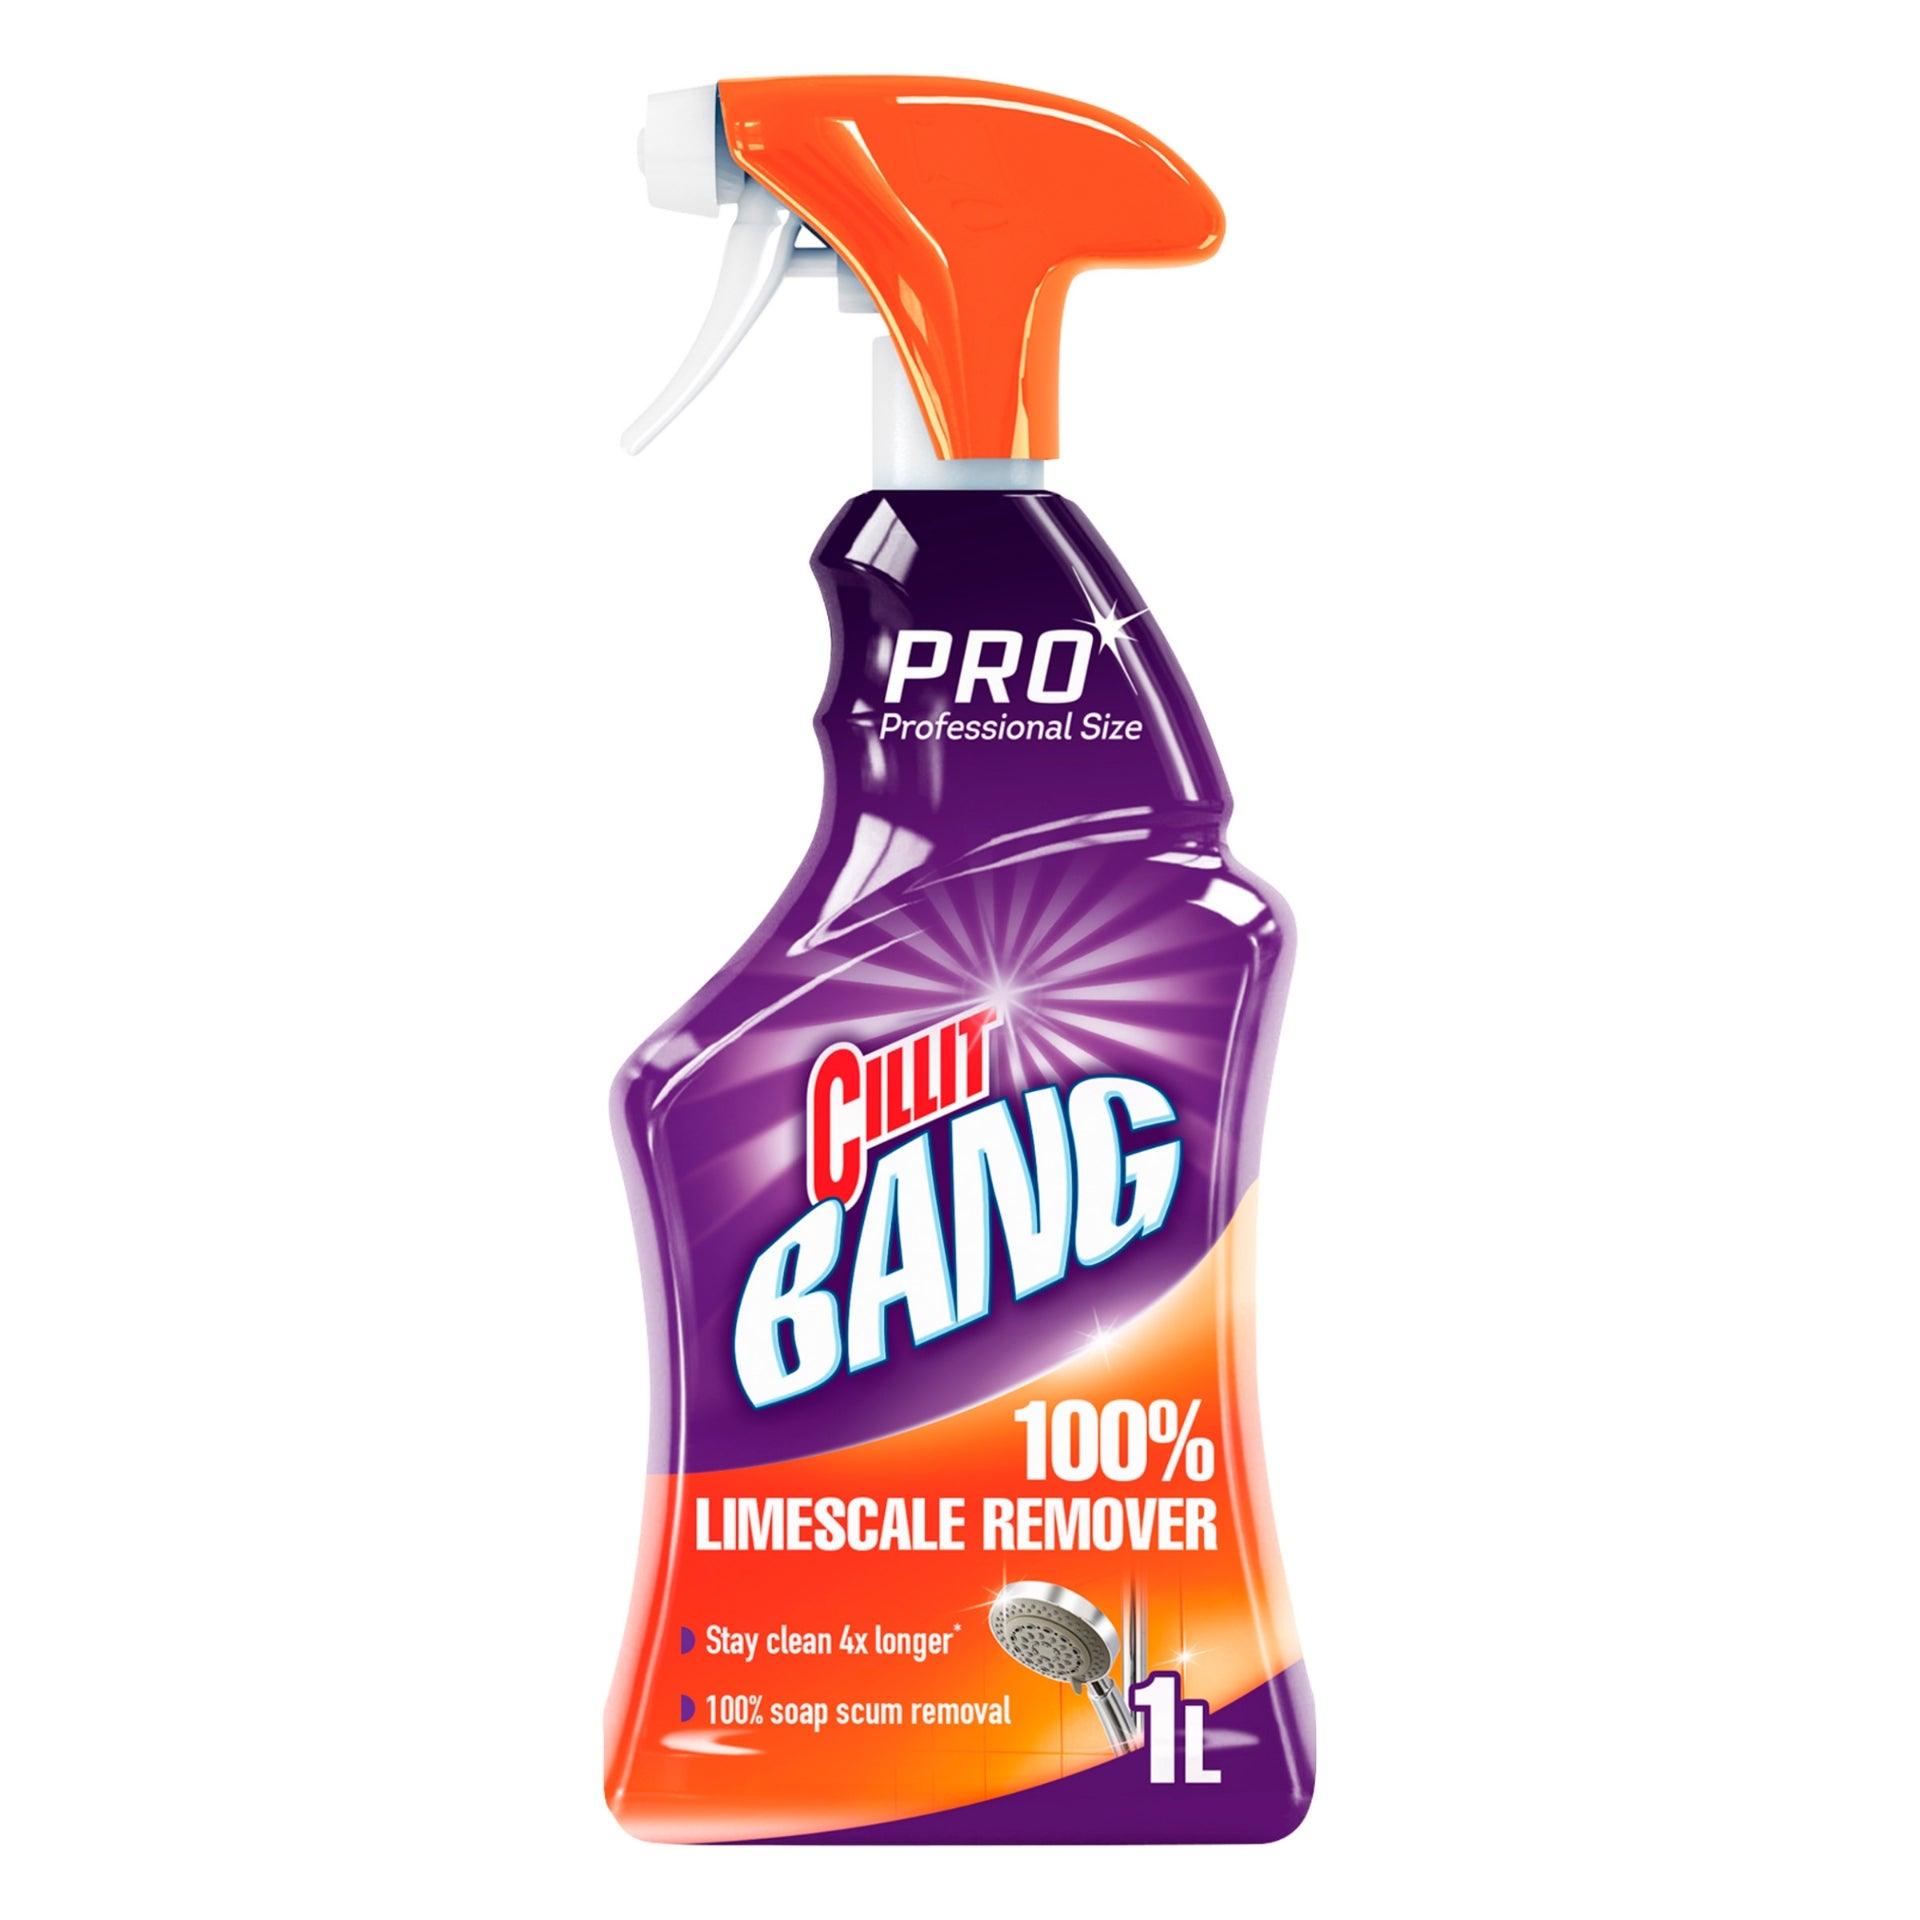 Cillit Bang Power & Limescale Remover Spray - 750ml - Vending Superstore